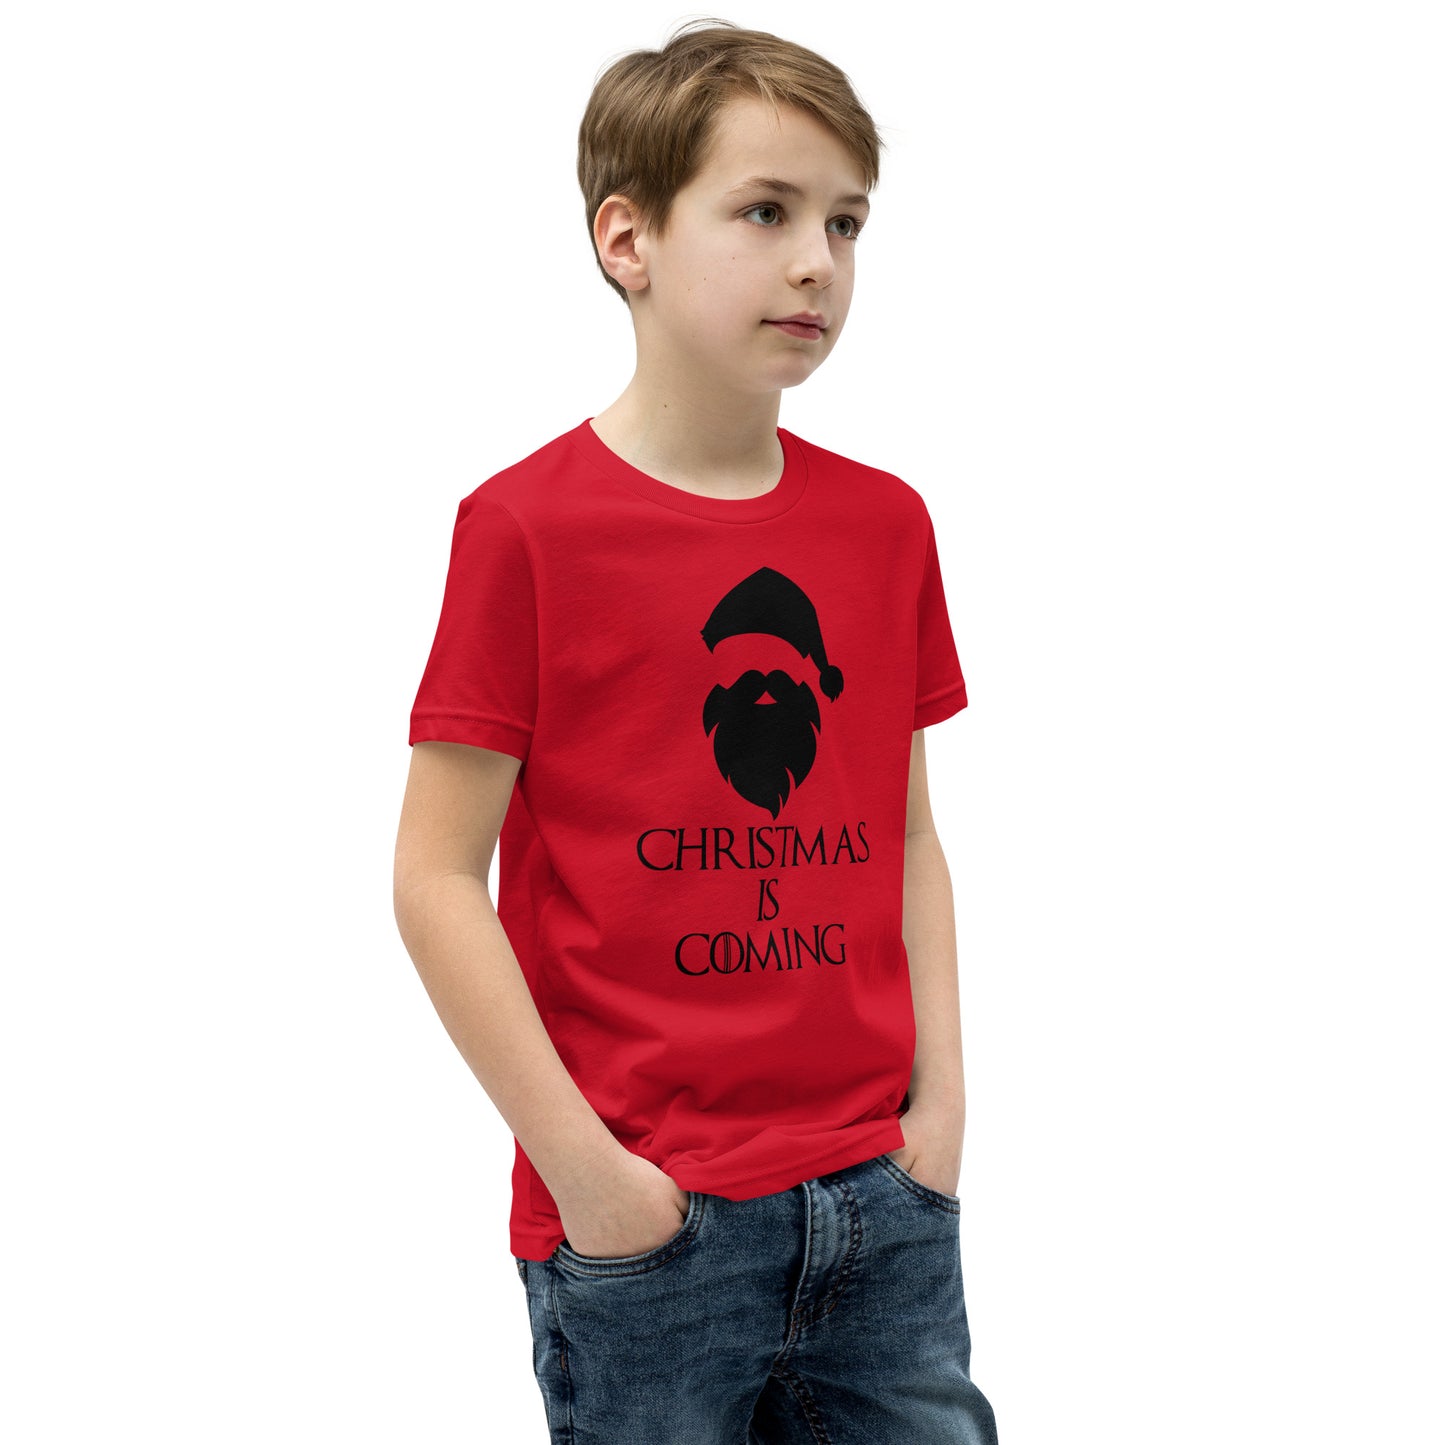 Youth 'Christmas is Coming' T-Shirt